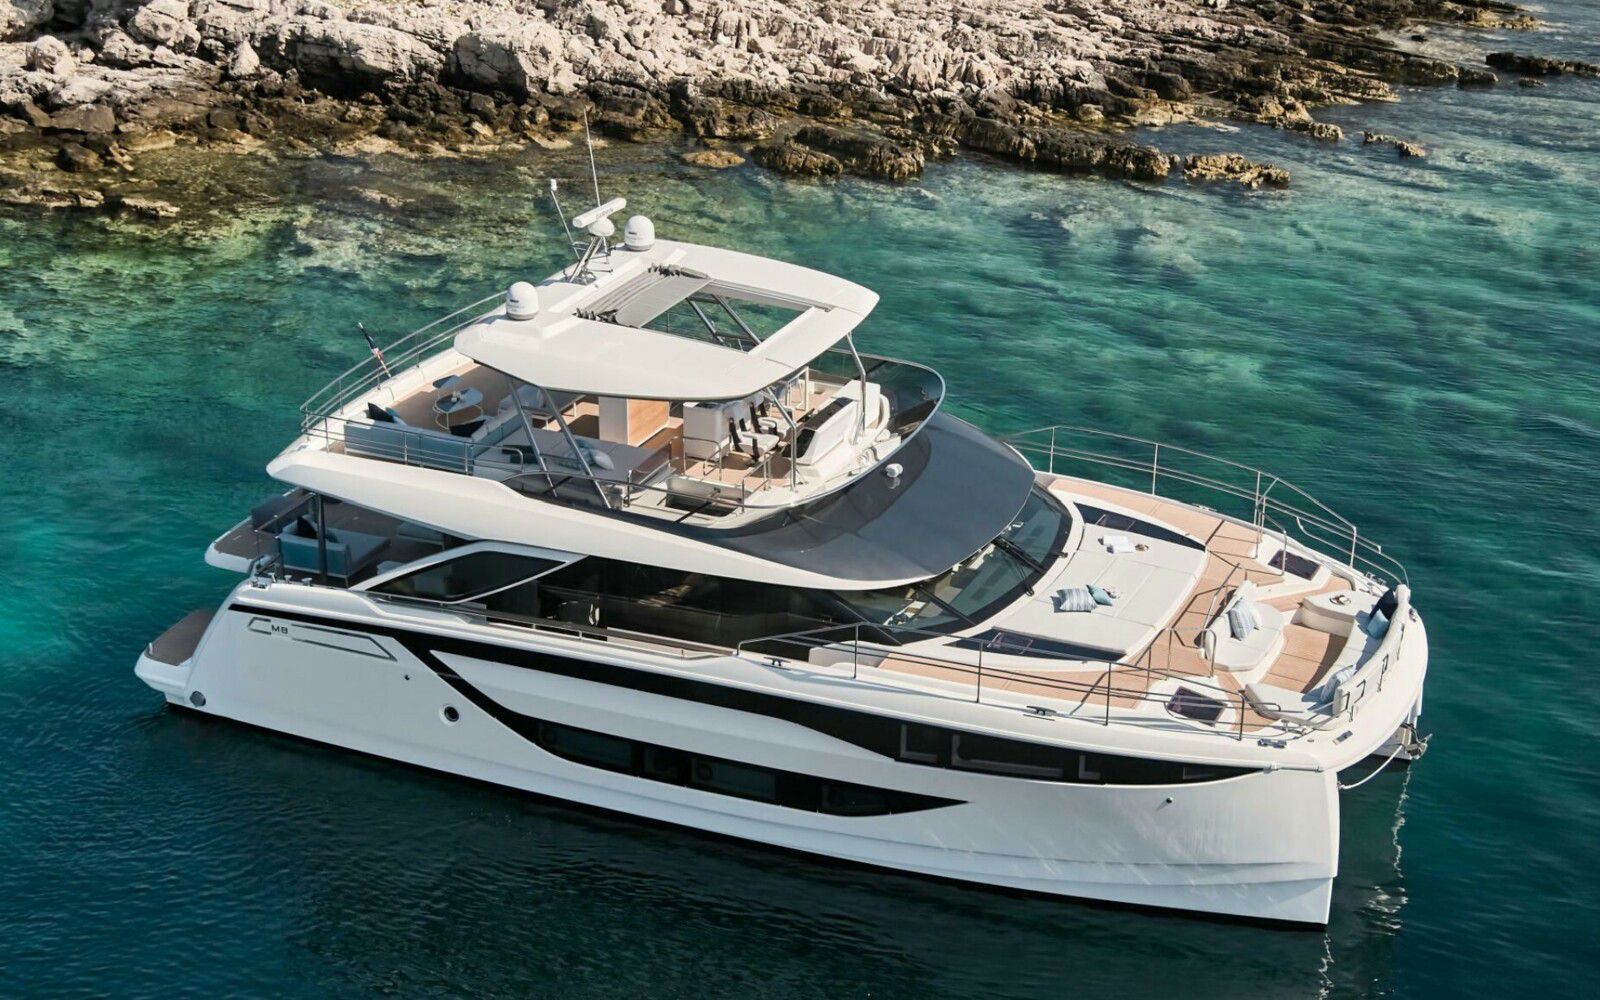 Prestige M8, a 65-foot motoryacht catamaran that's playing for